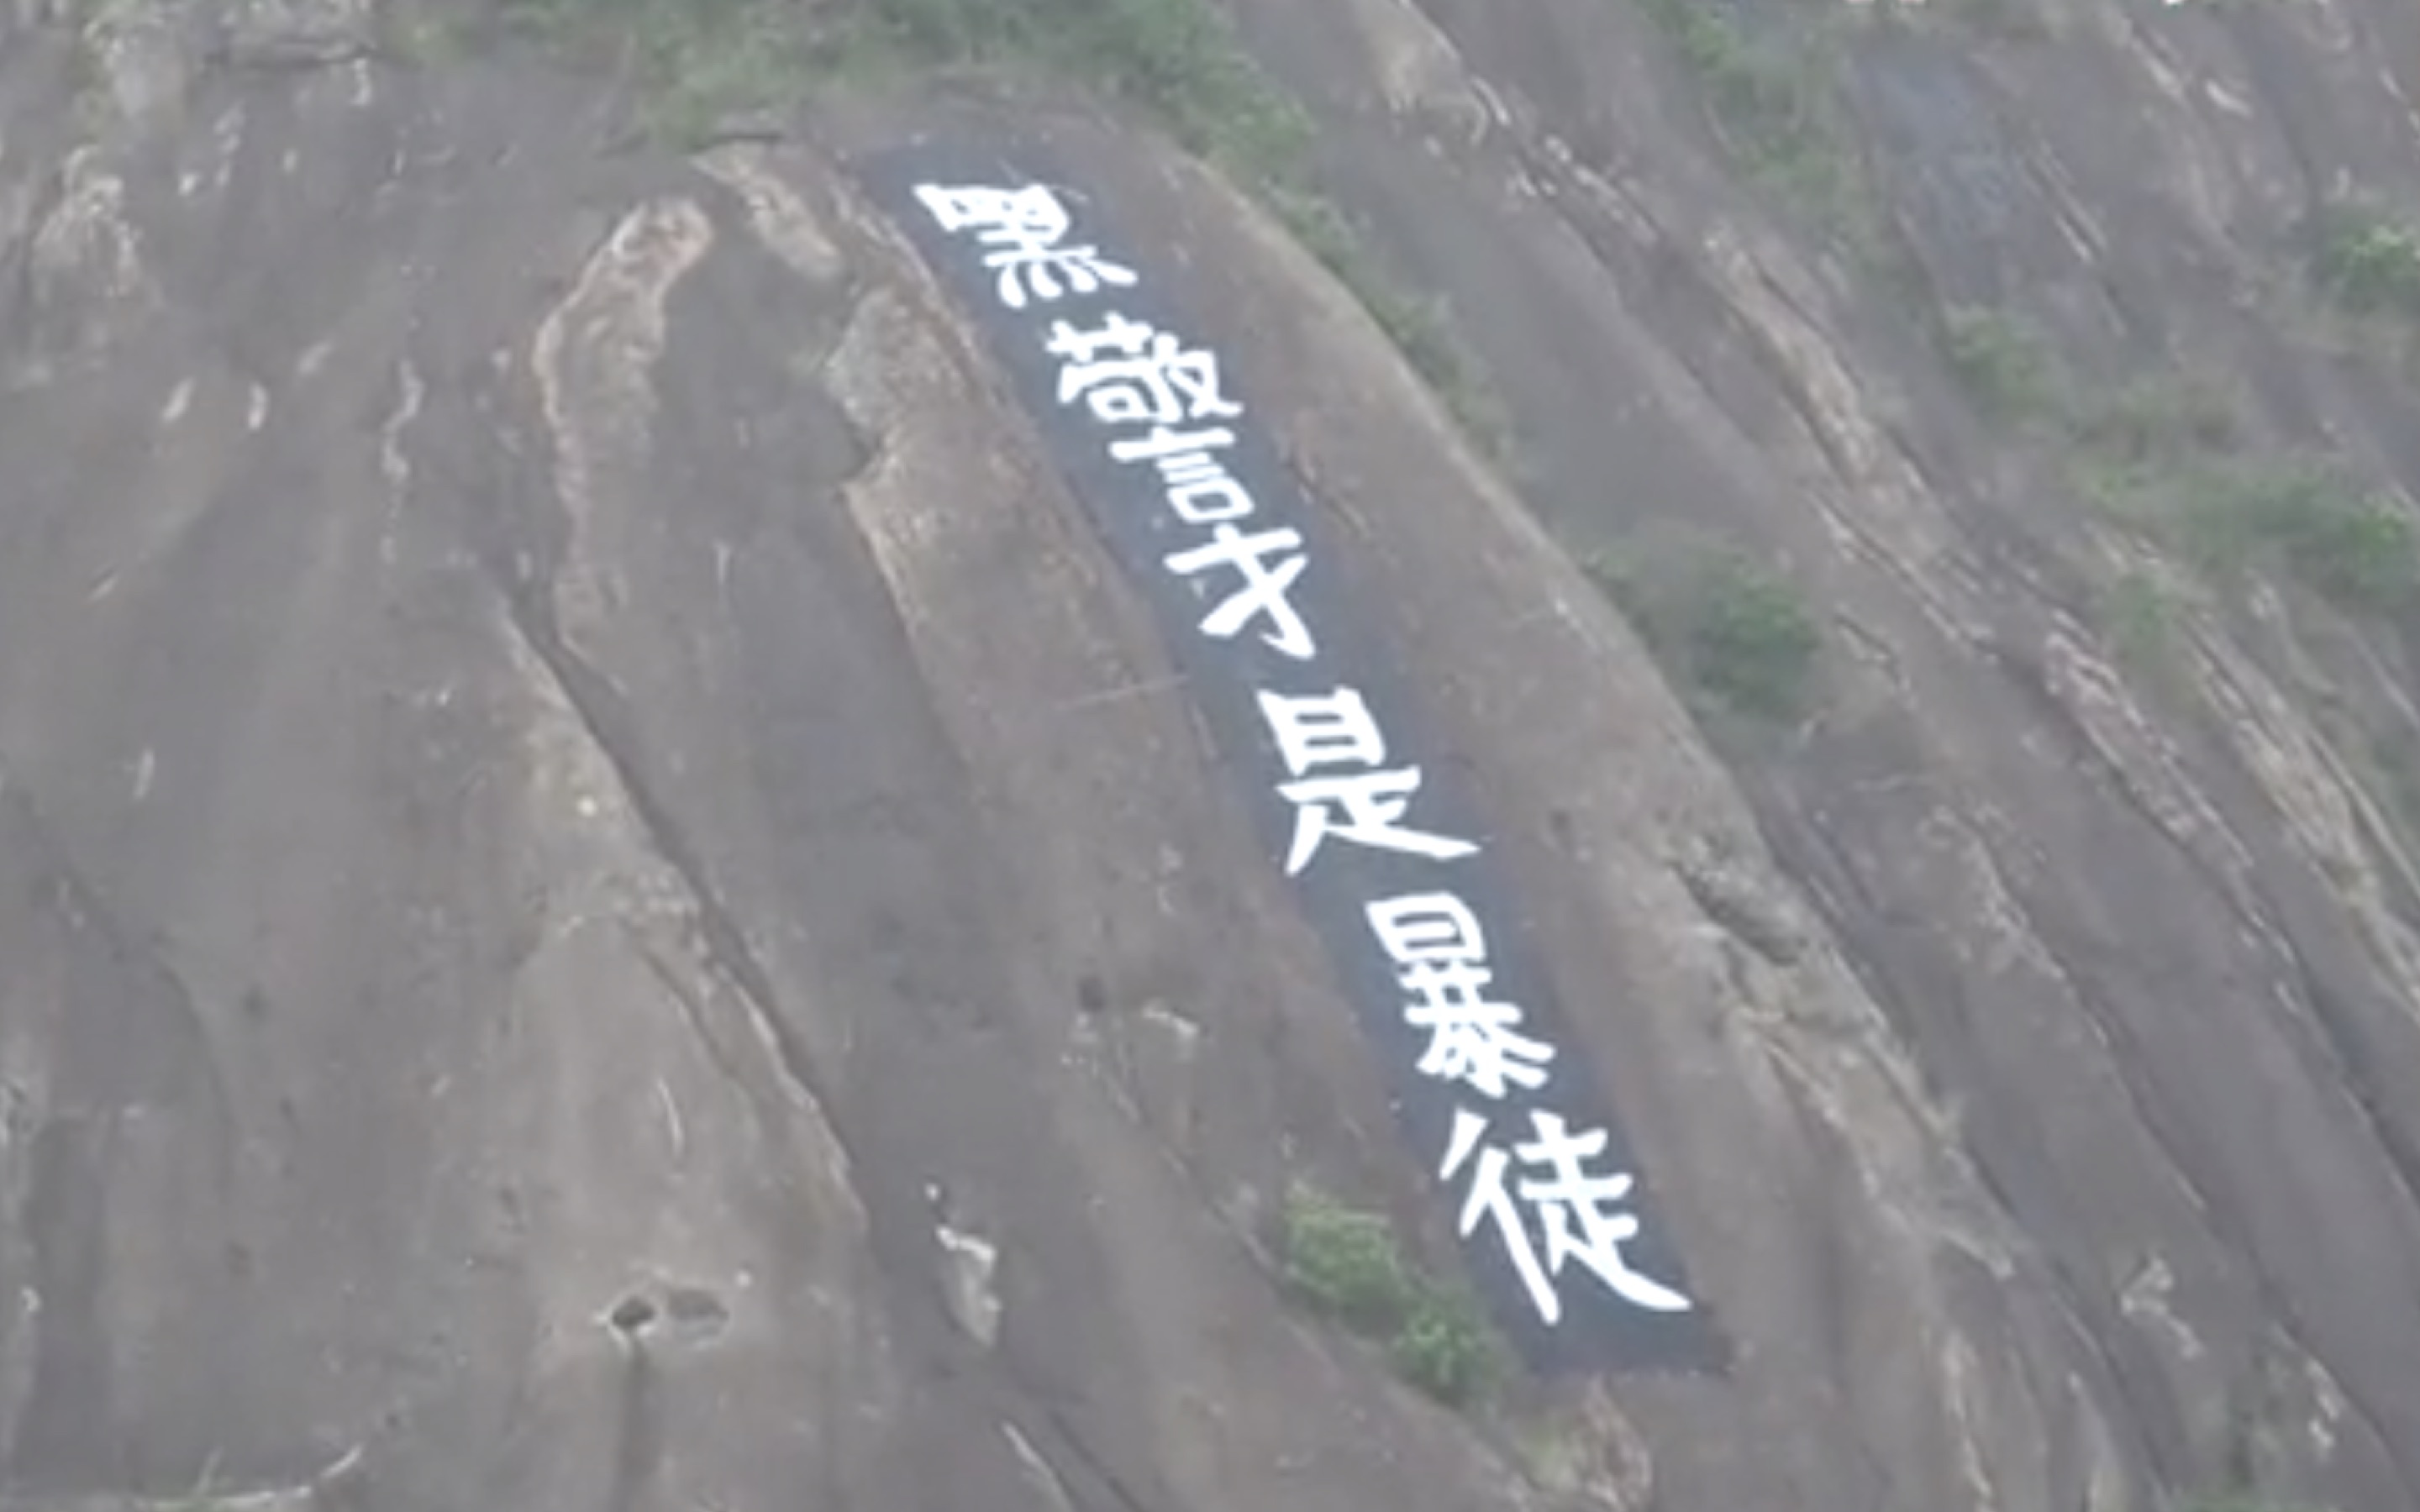 A banner reading ‘dirty cops are rioters’ was unfurled on the side of Devil’s Peak last night. Screengrab via Apple Daily video.